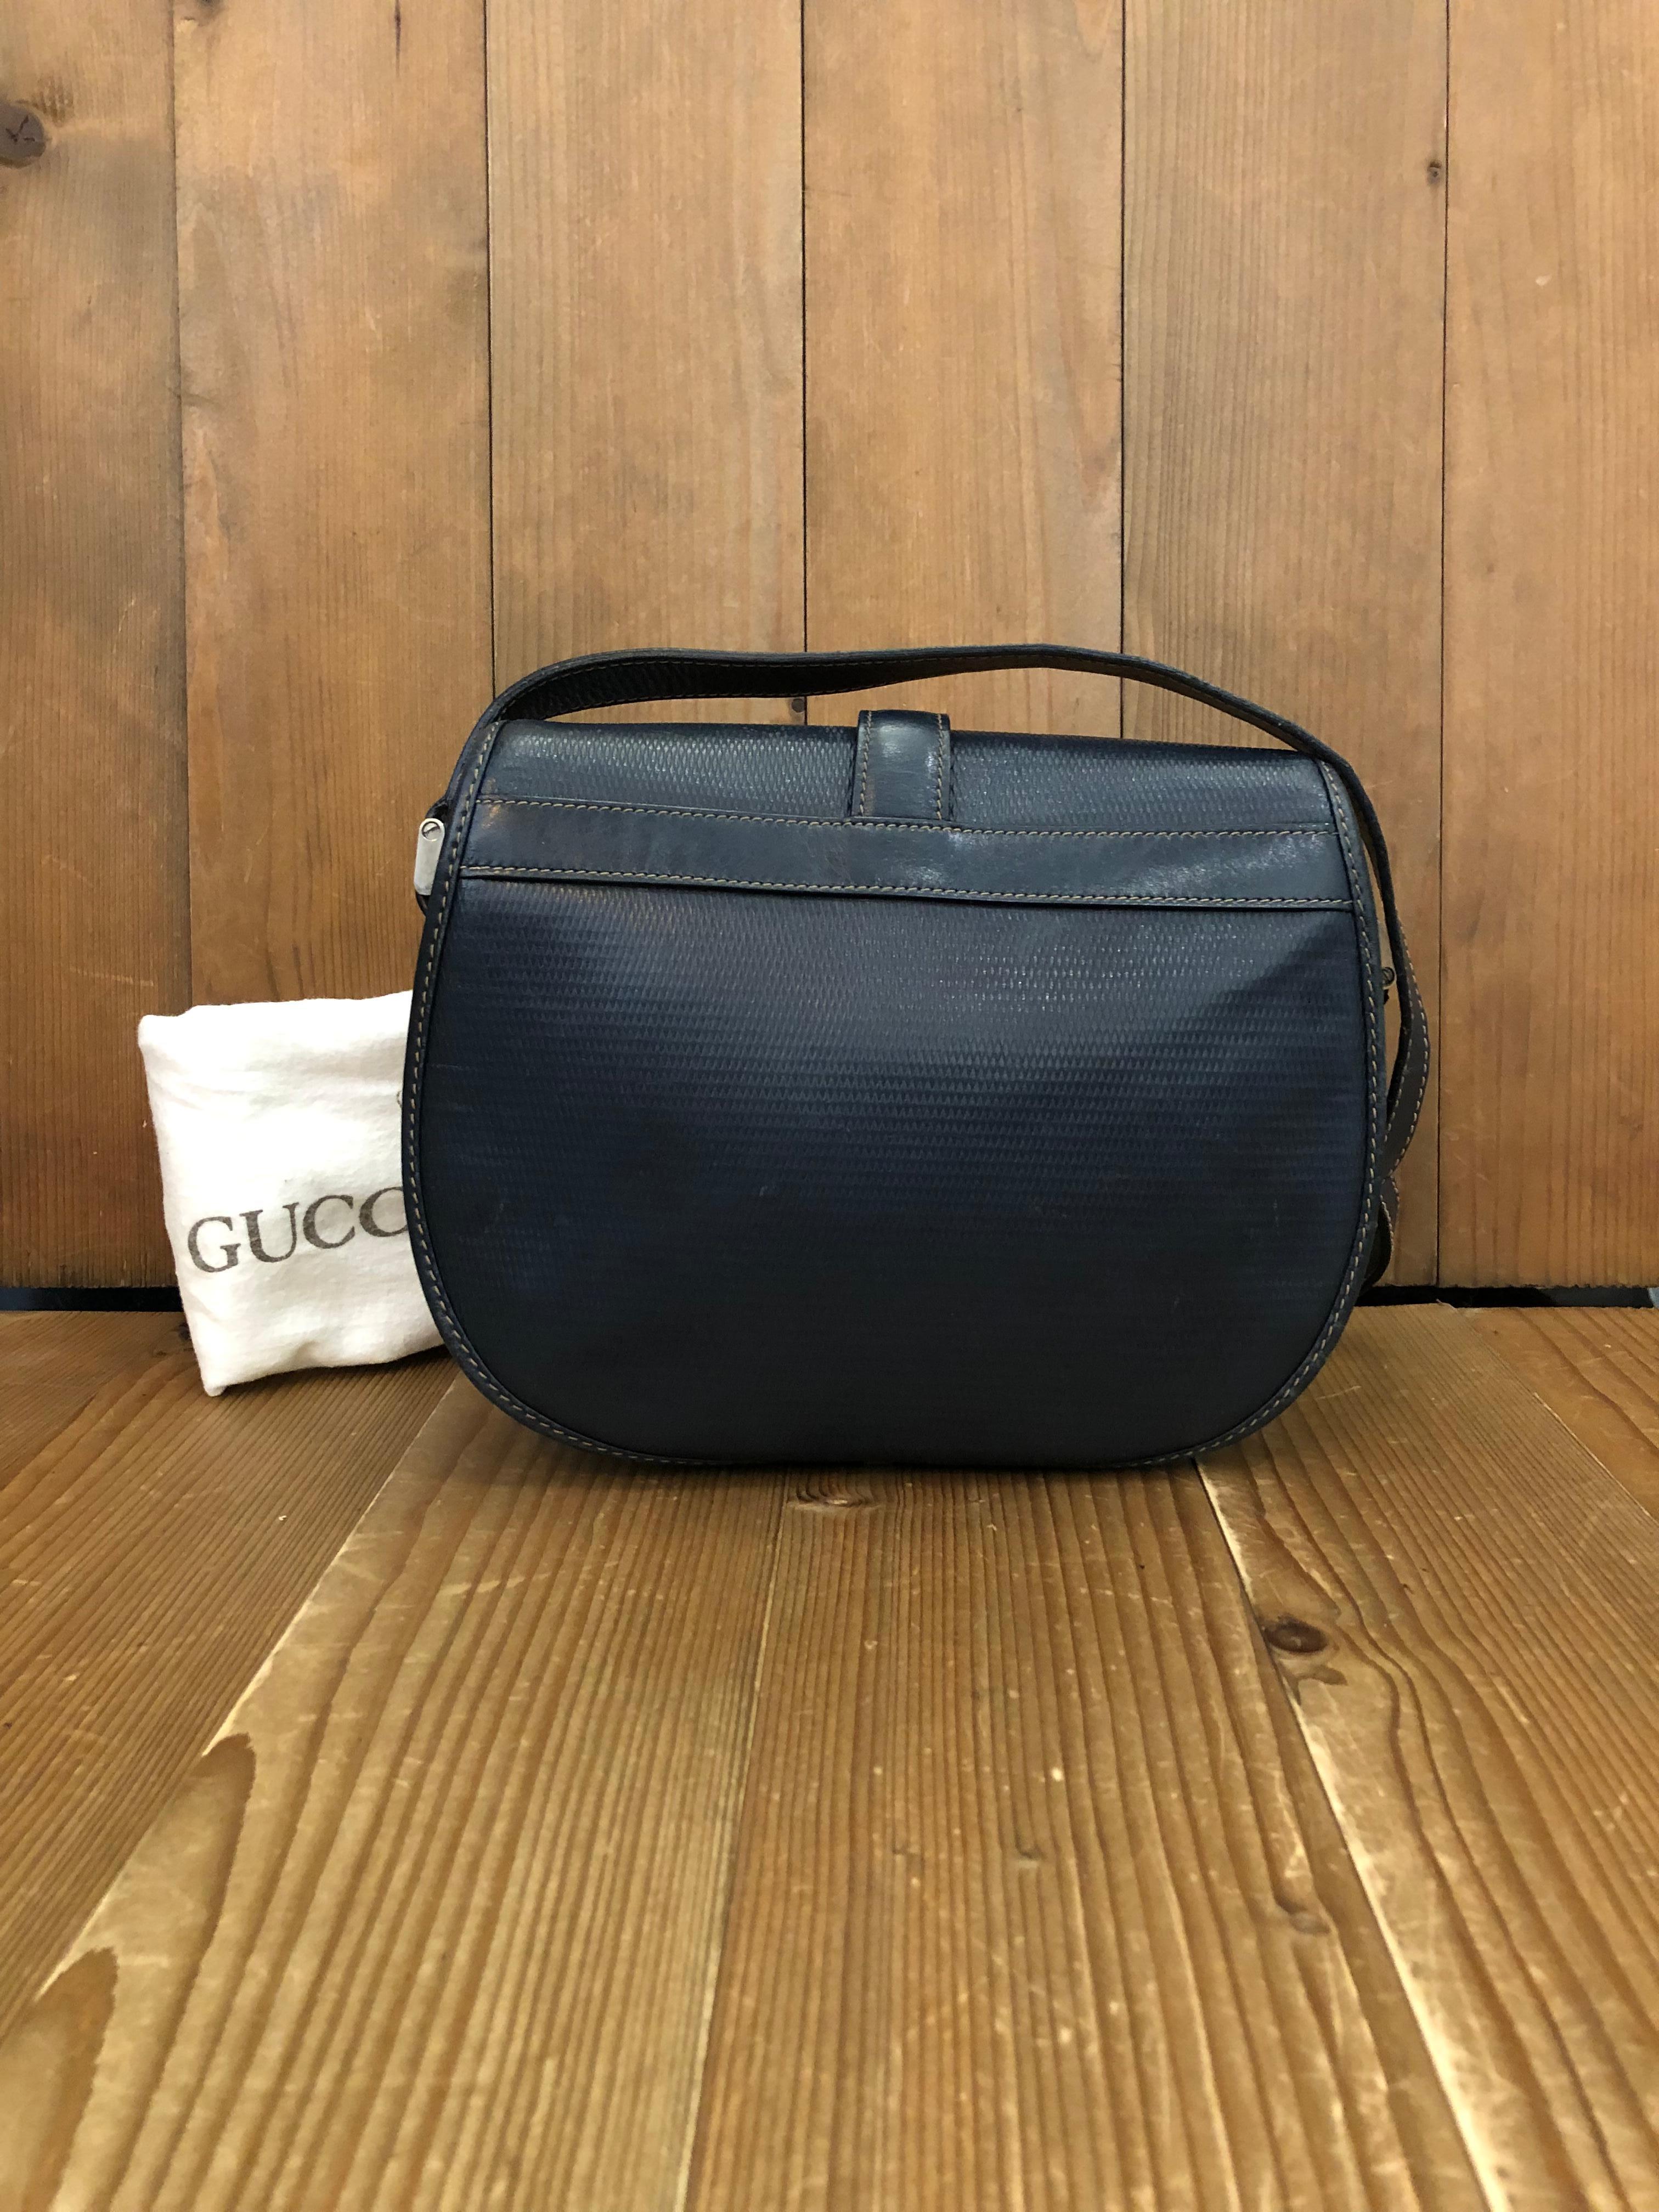 This vintage GUCCI crossbody bag is crafted of textured calfskin leather in navy with equestrian accent. Front flap closure open to a suede interior in navy with one zippered pocket. Made in Italy. Measures approximately 7.5 x 7 x 2.25 inches Drop